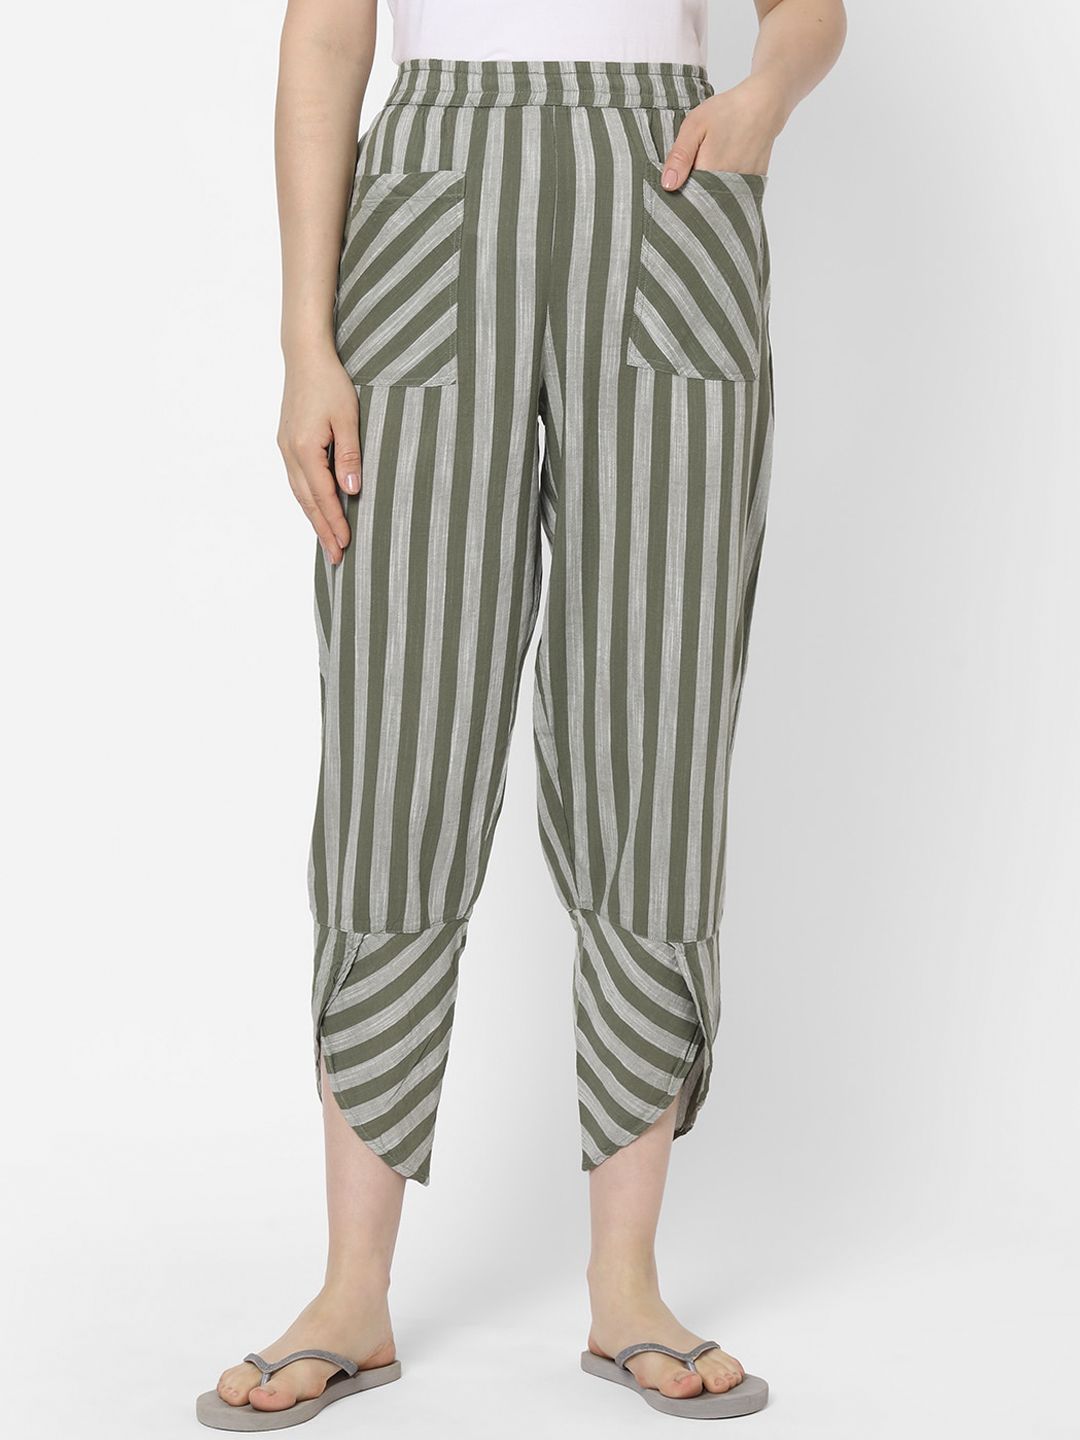 Mystere Paris Women Green & Grey Striped Lounge Pants Price in India